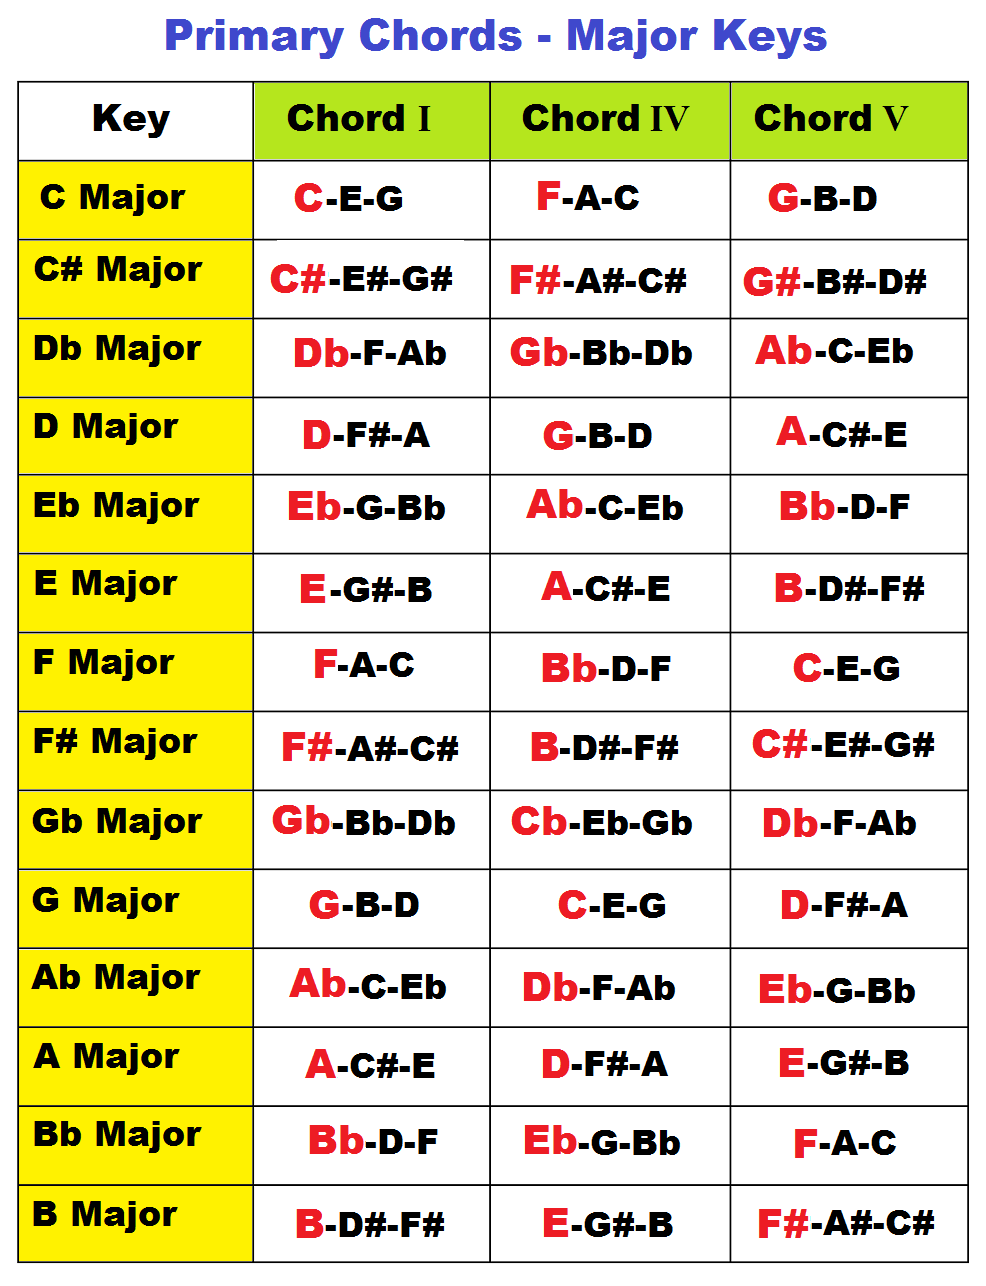 all chords and their notes